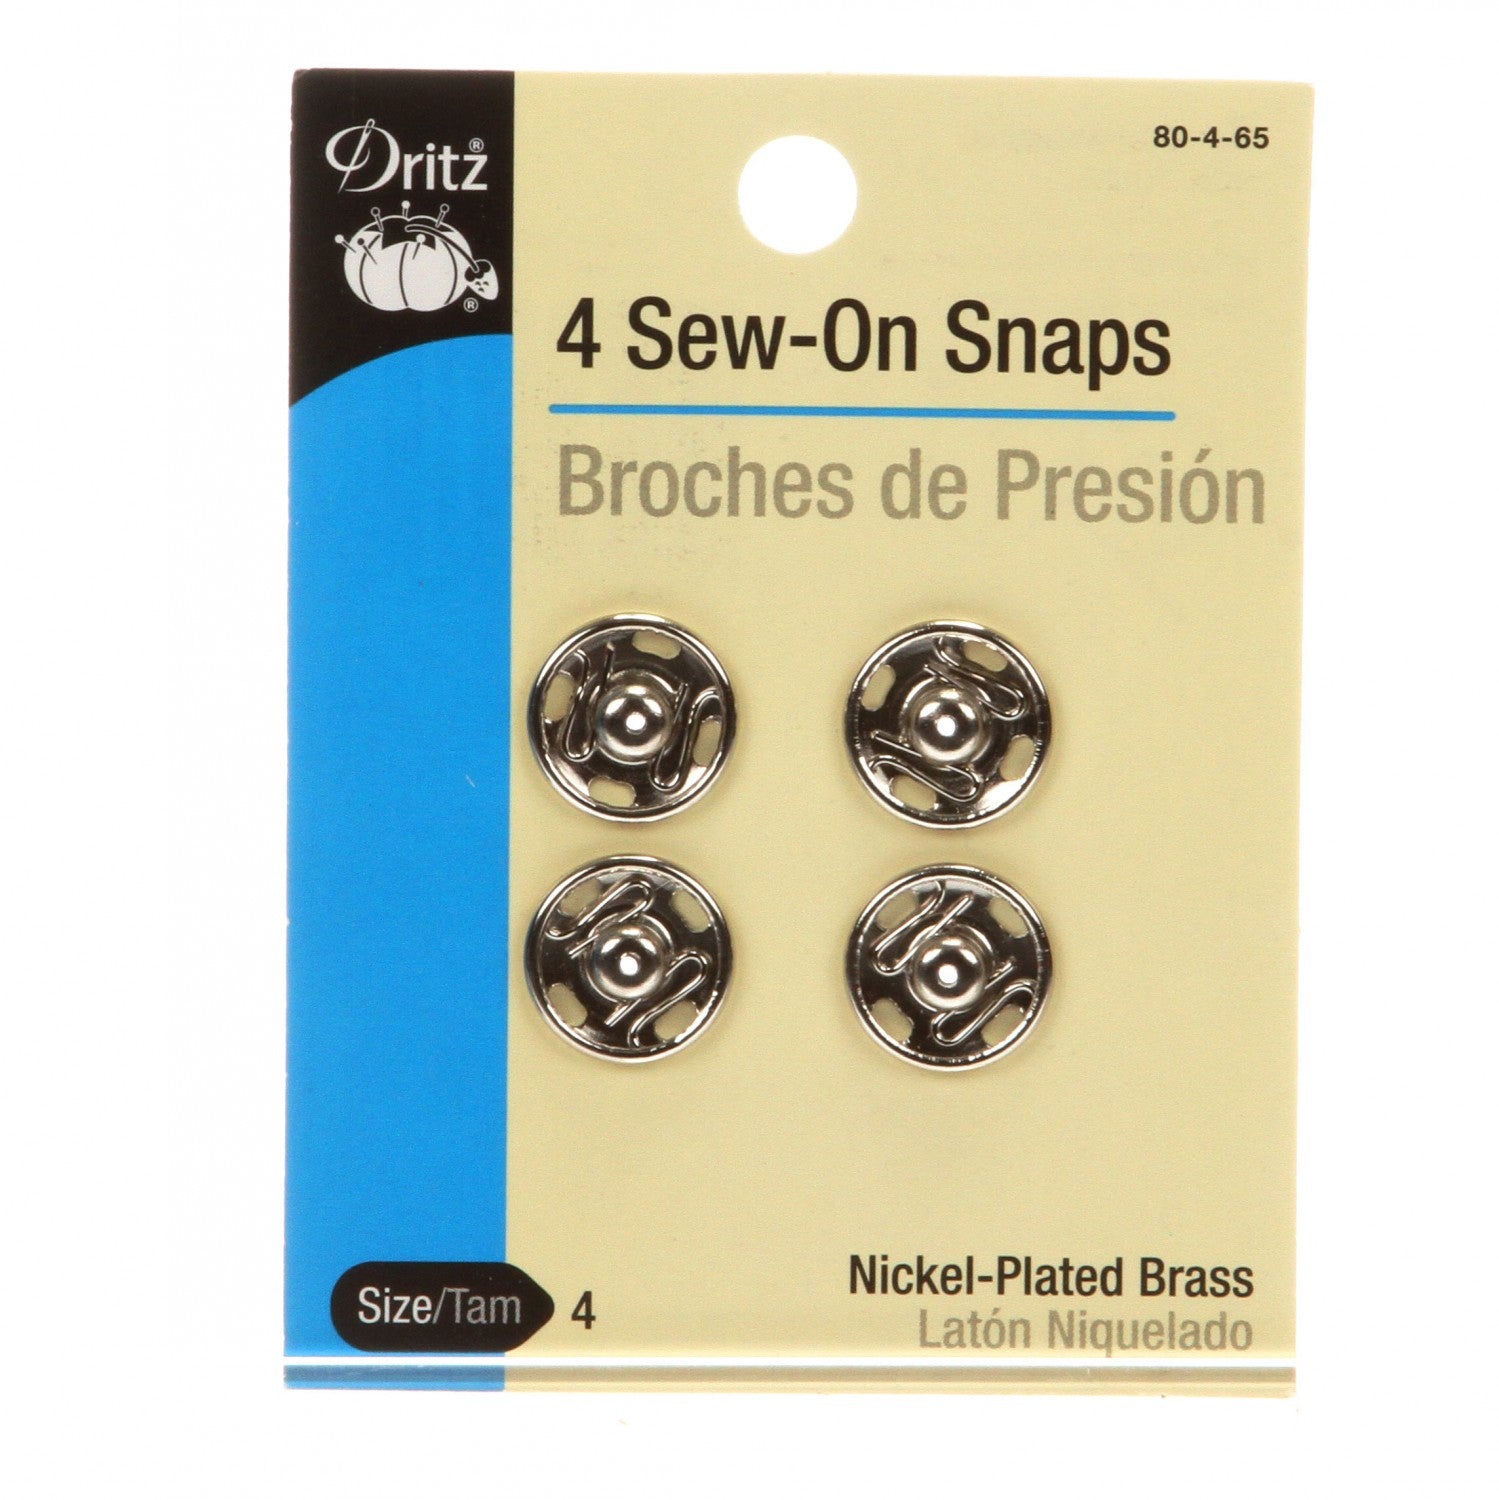 Sew-On Snaps - Size 4